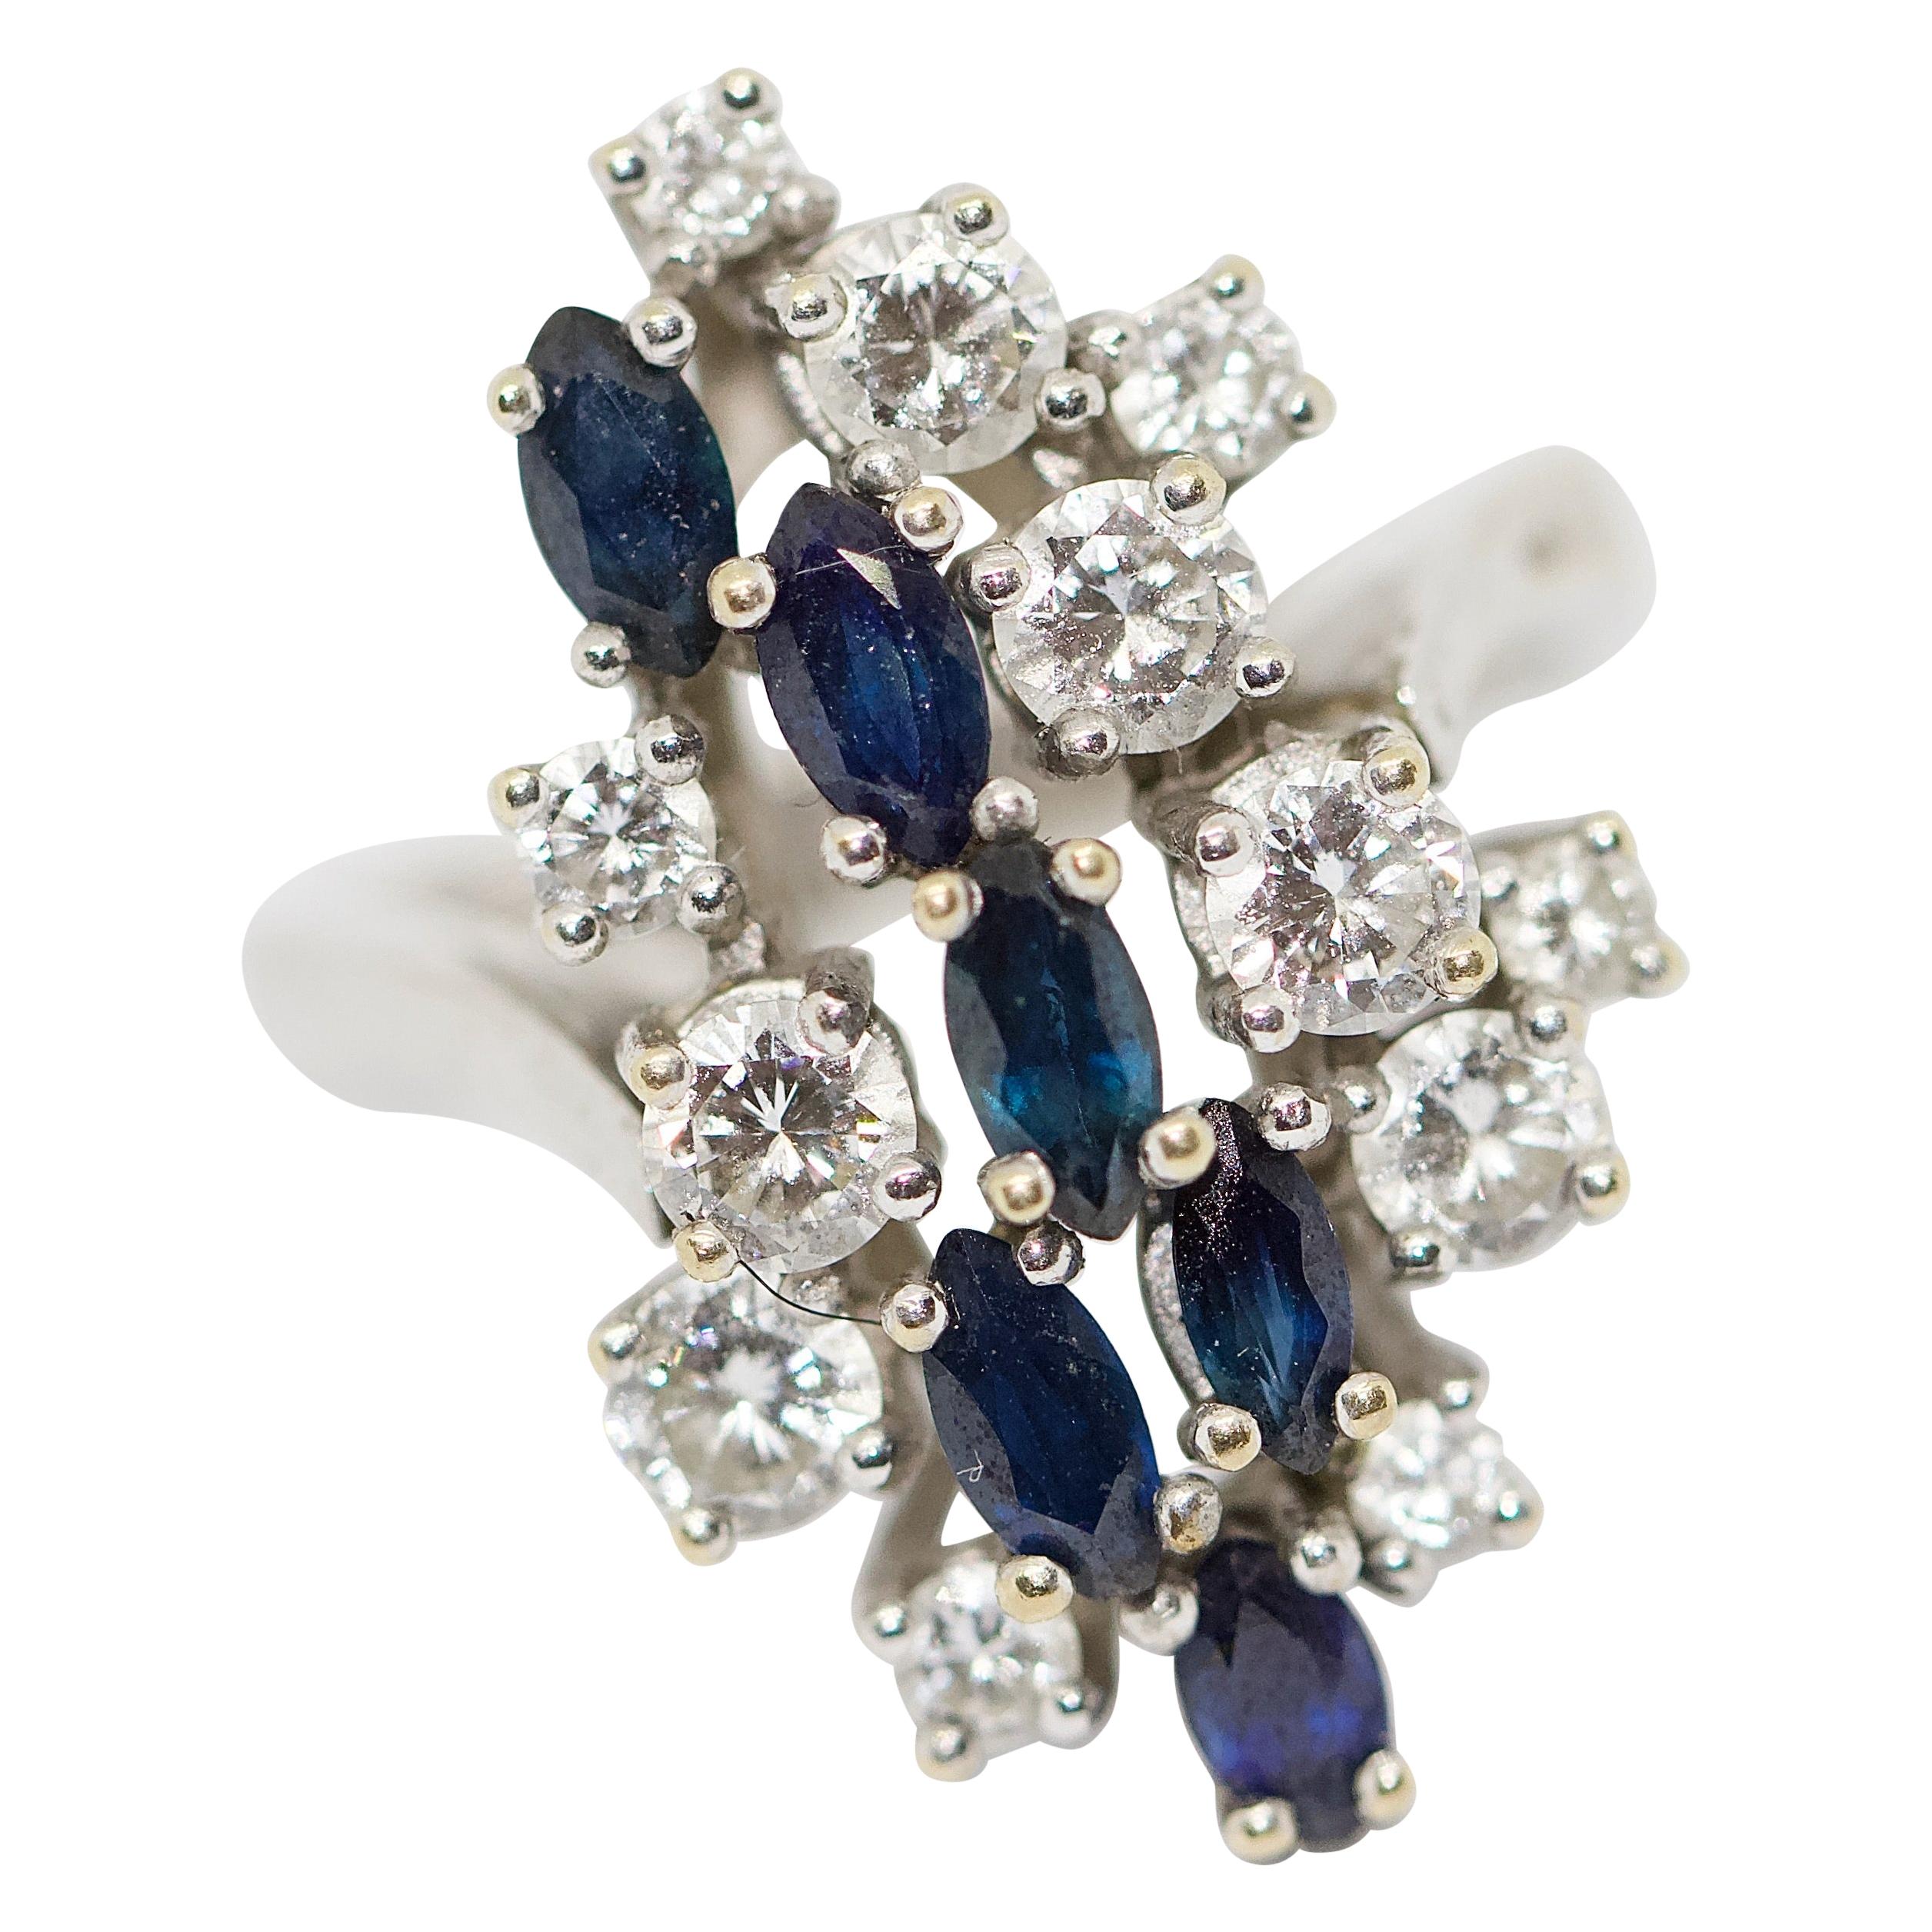 14 Karat White Gold Ring with Diamonds and Sapphires